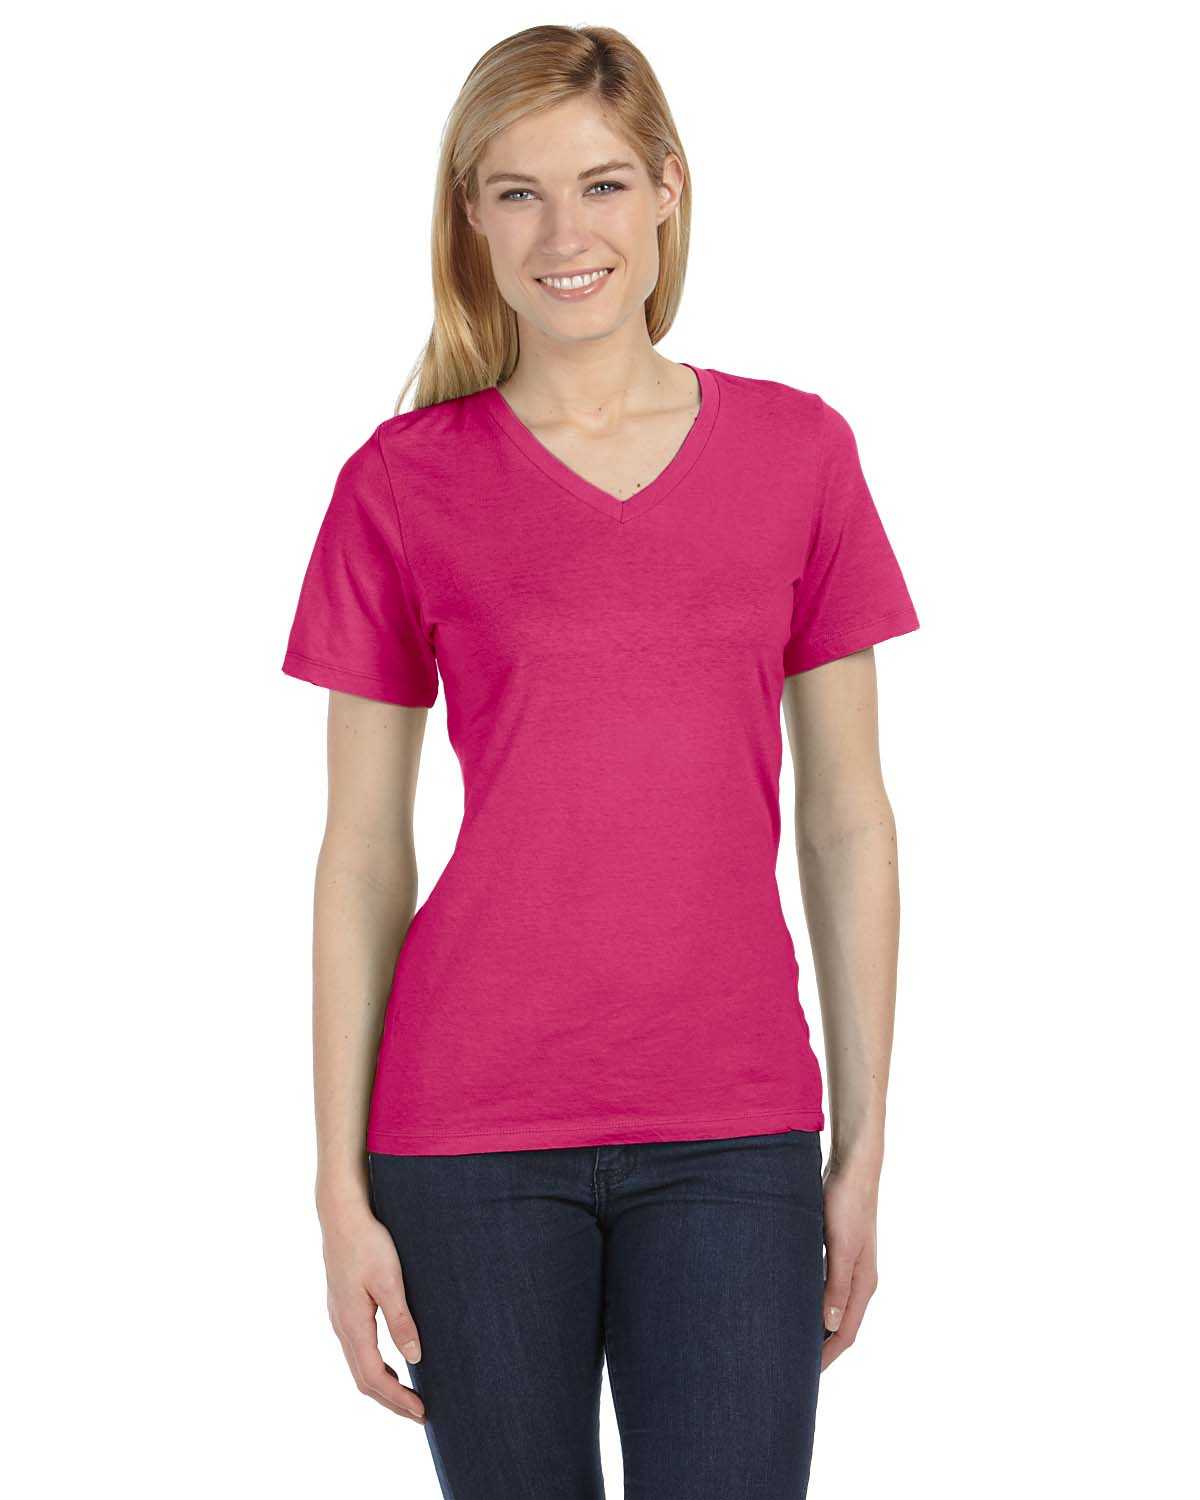 Bella + Canvas 6405 Ladies' Relaxed Jersey Short-Sleeve V-Neck T-Shirt ...